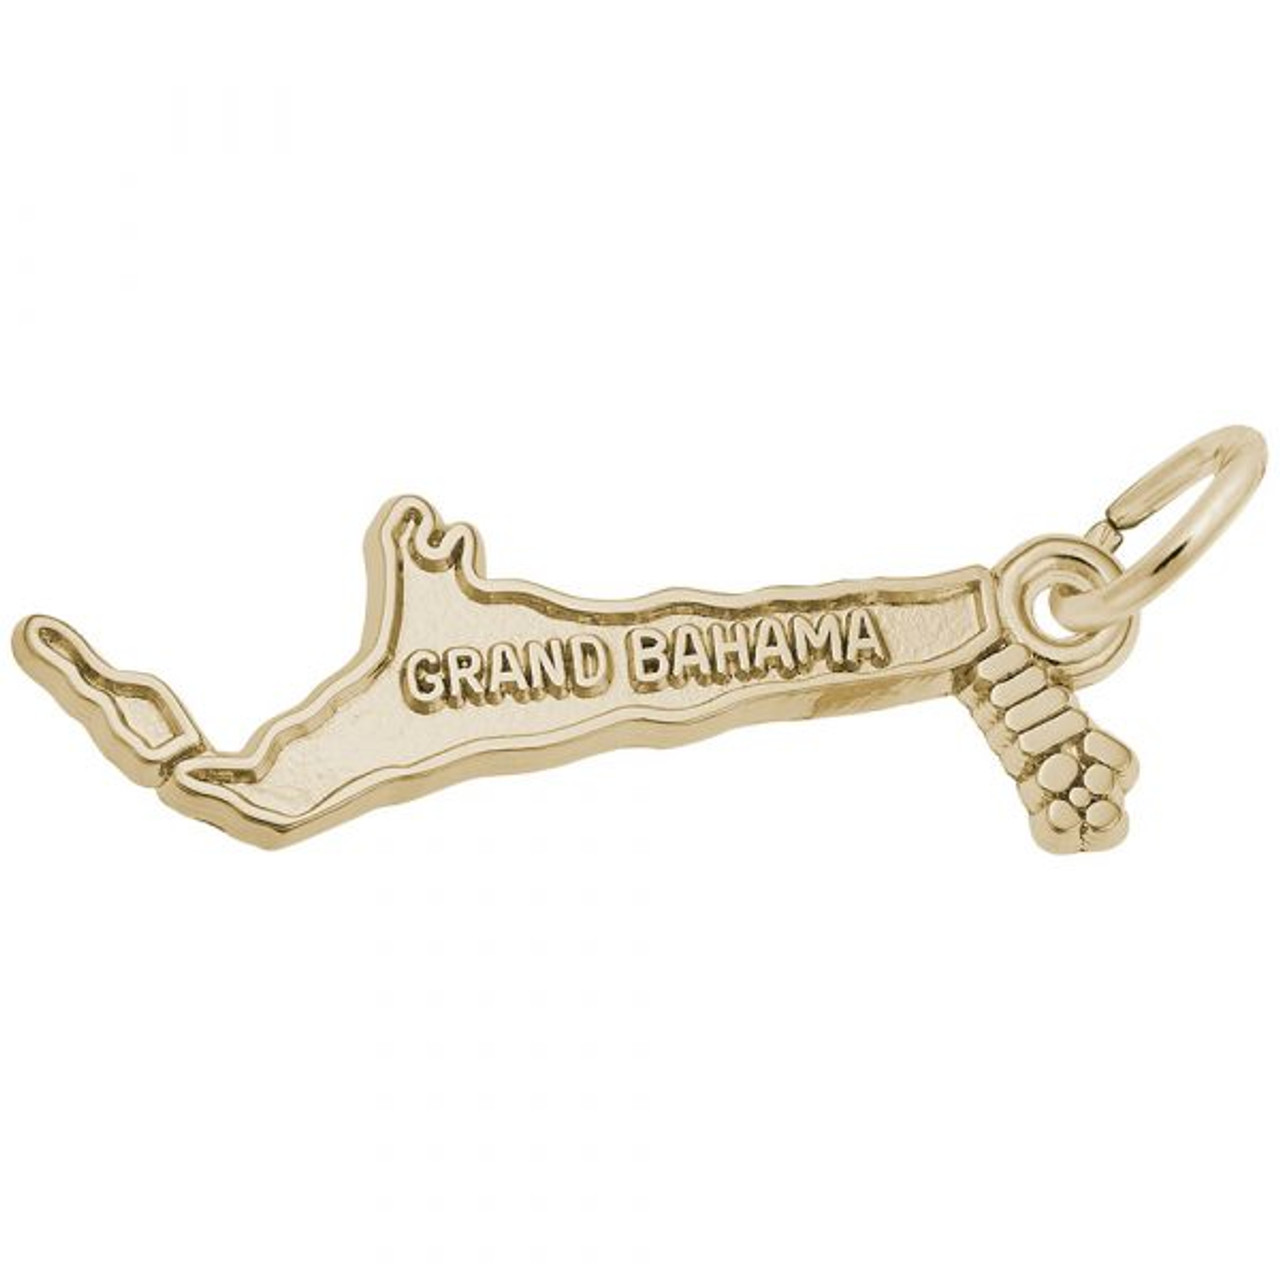 Grand Bahama Map Gold Charm - Gold Plate, 10k Gold, 14k Gold